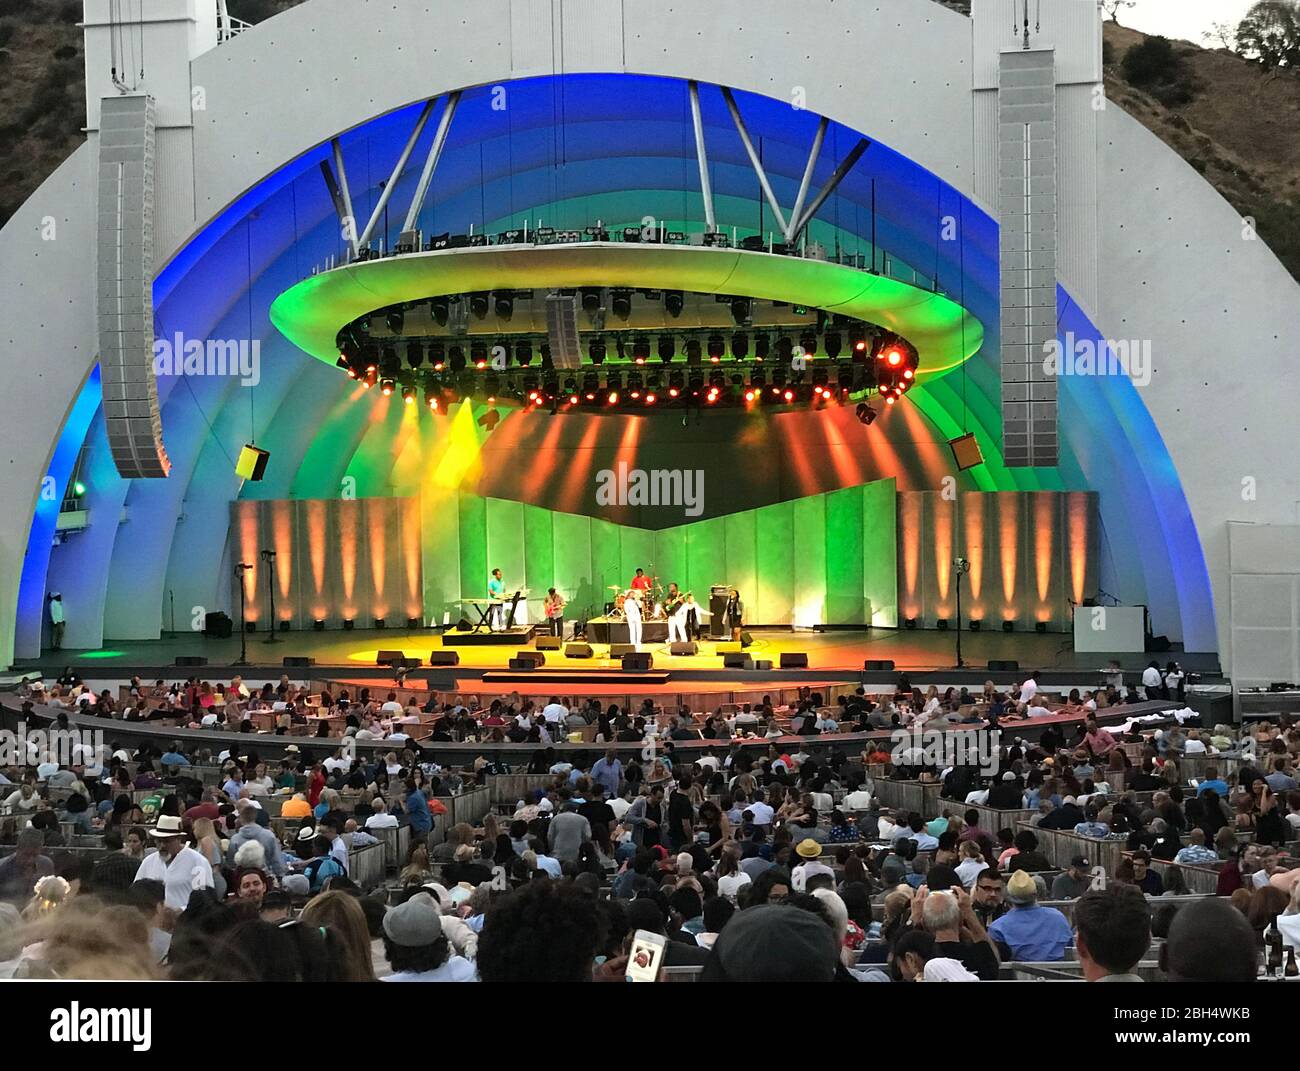 Konzert mit farbenfroher Beleuchtung im Hollywood Bowl in Los Angeles, CA Stockfoto